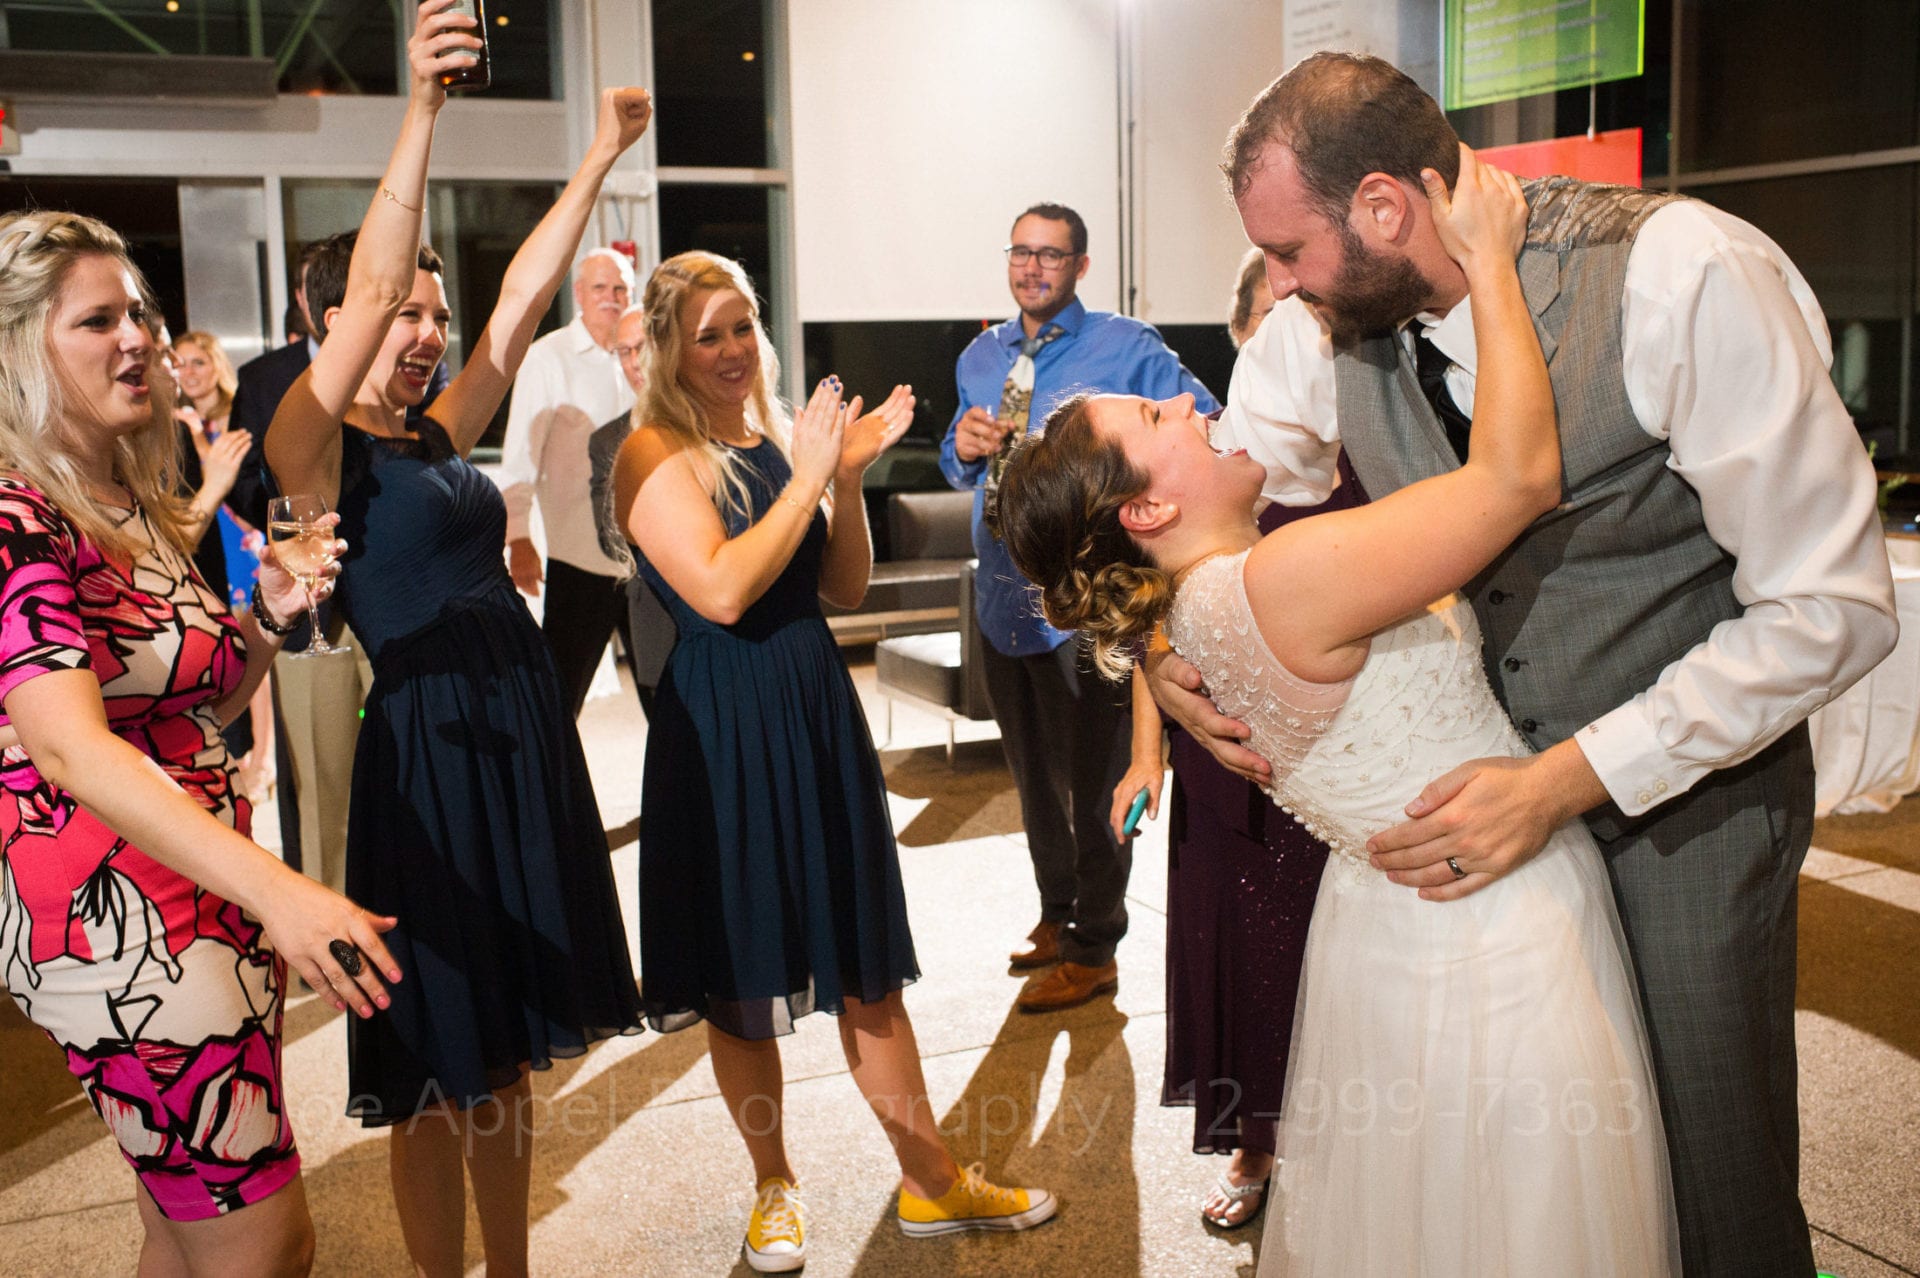 A groom dips his bride who laughs while three women cheer at the end of their Children's Museum of Pittsburgh wedding.